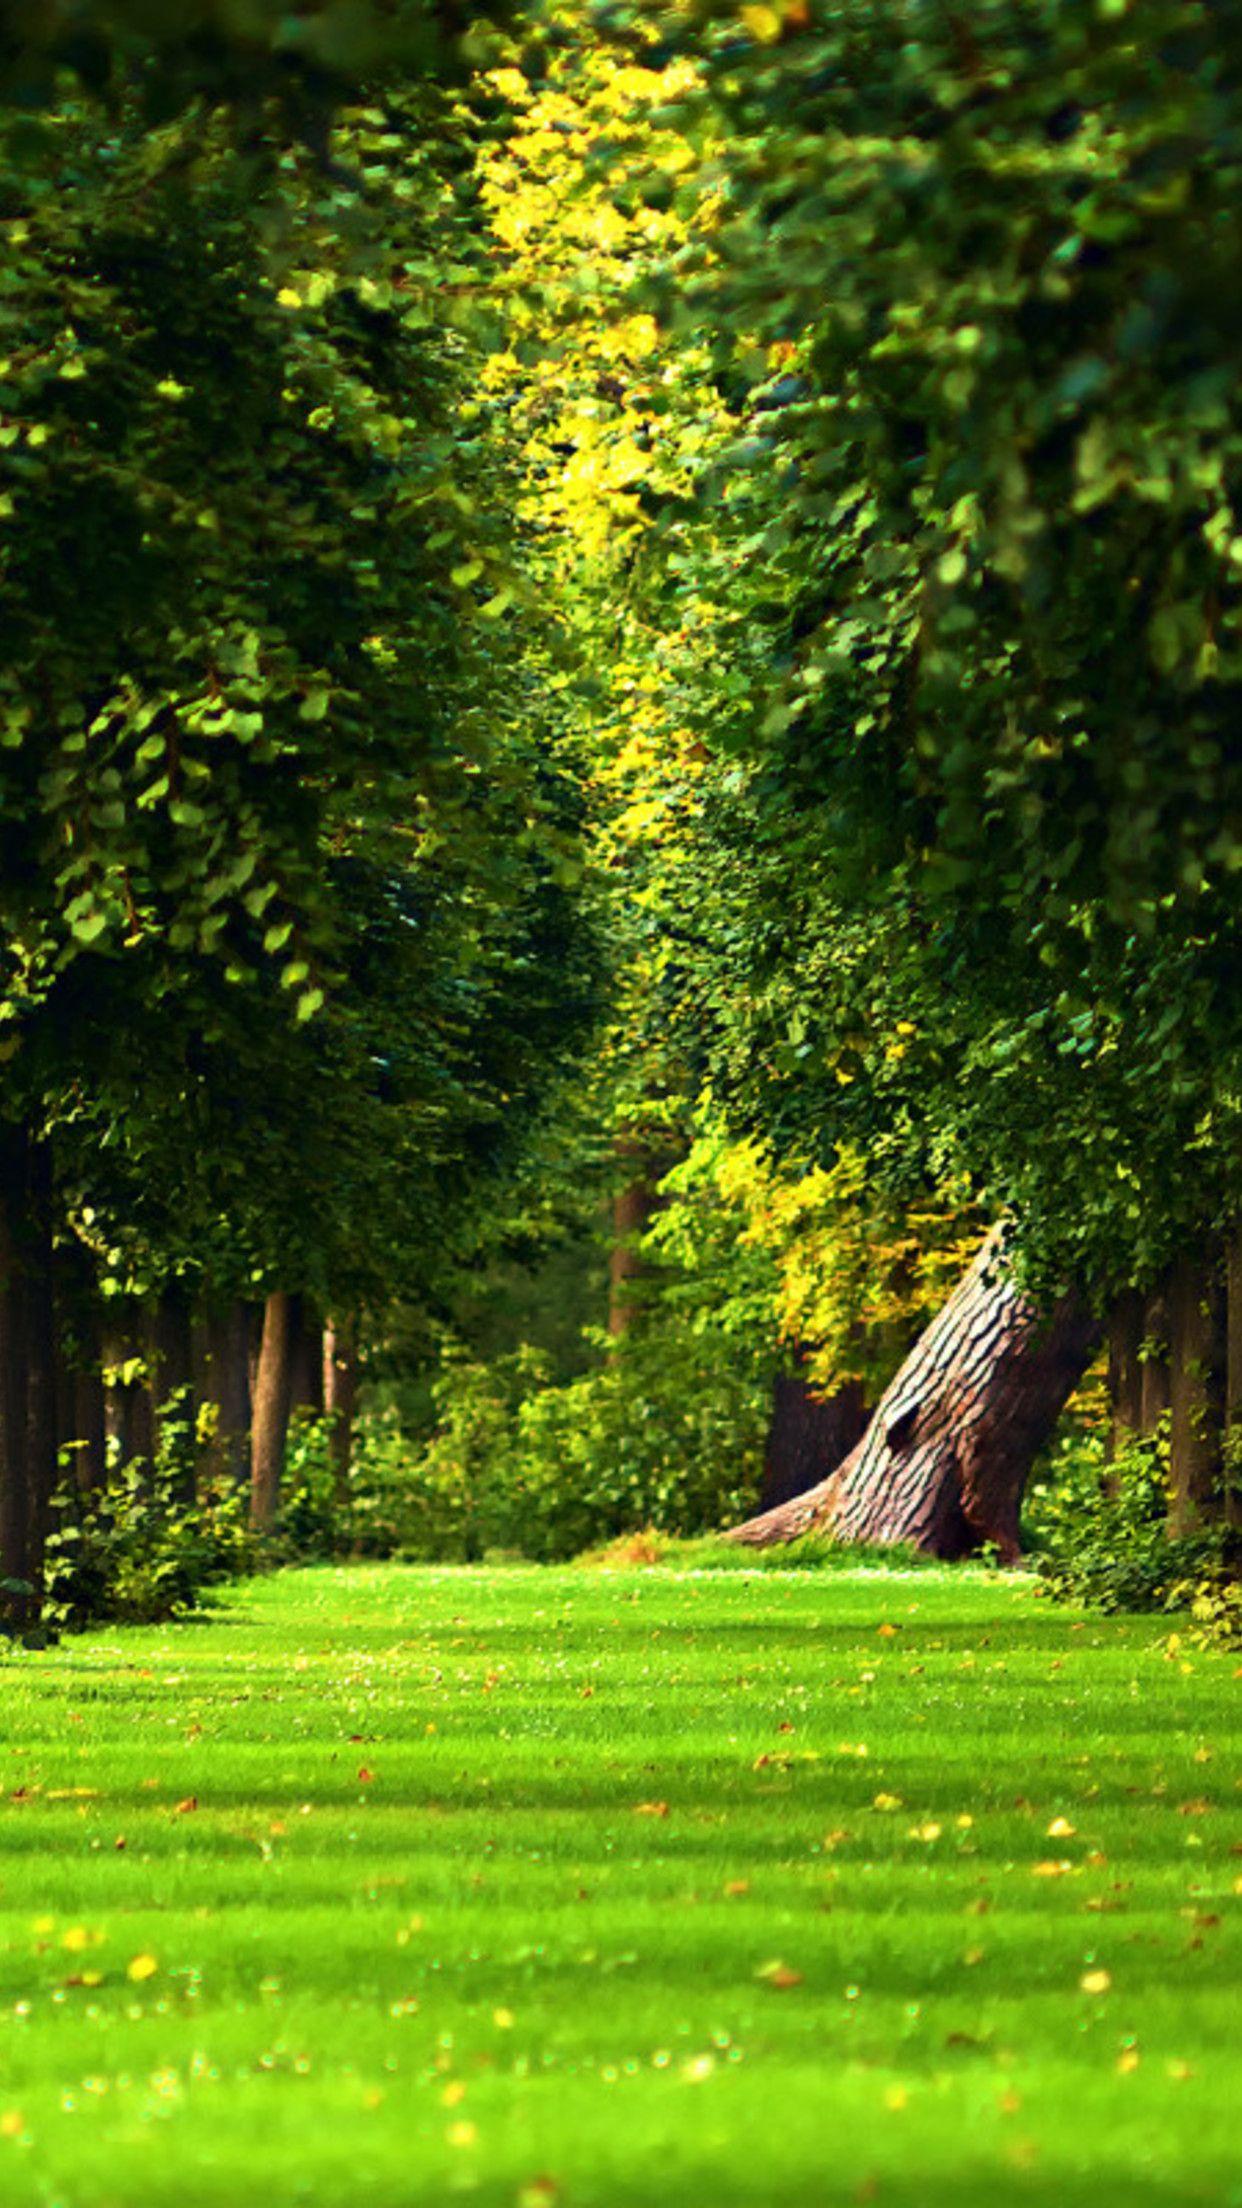 greenery 1080P 2k 4k Full HD Wallpapers Backgrounds Free Download   Wallpaper Crafter